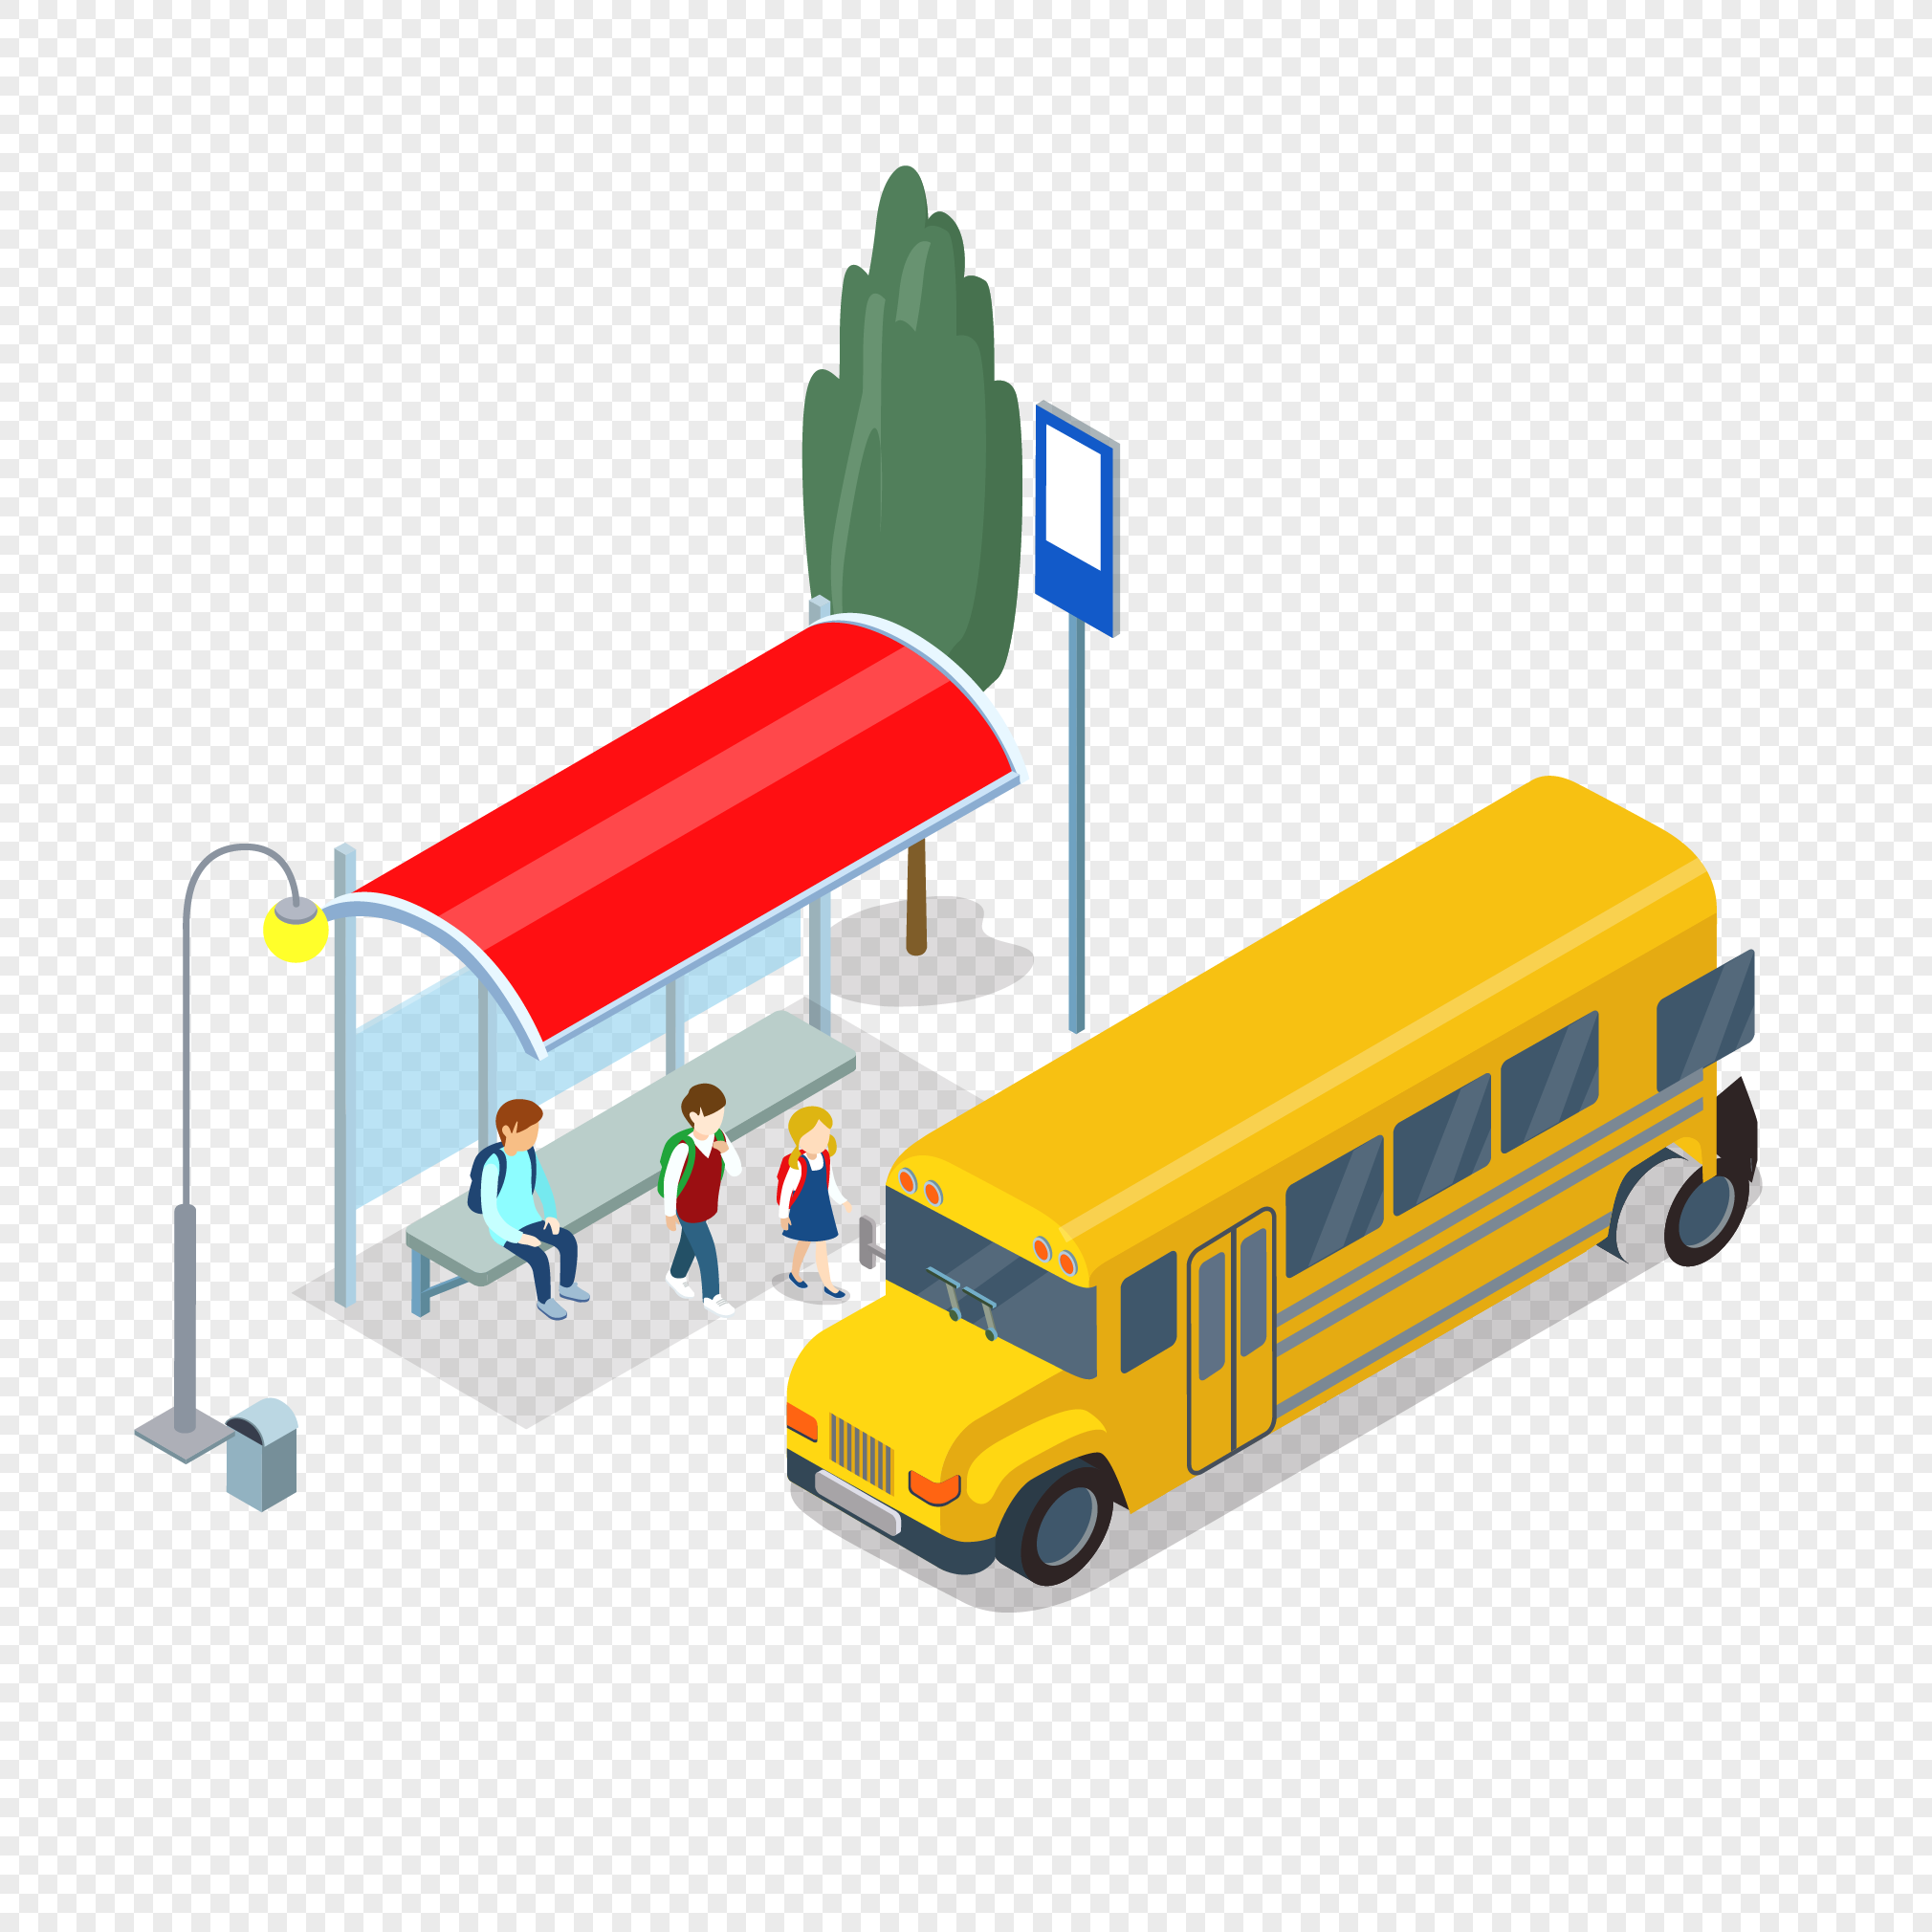 Bus stop and other car elements, platform, cocomelon, car png image free download